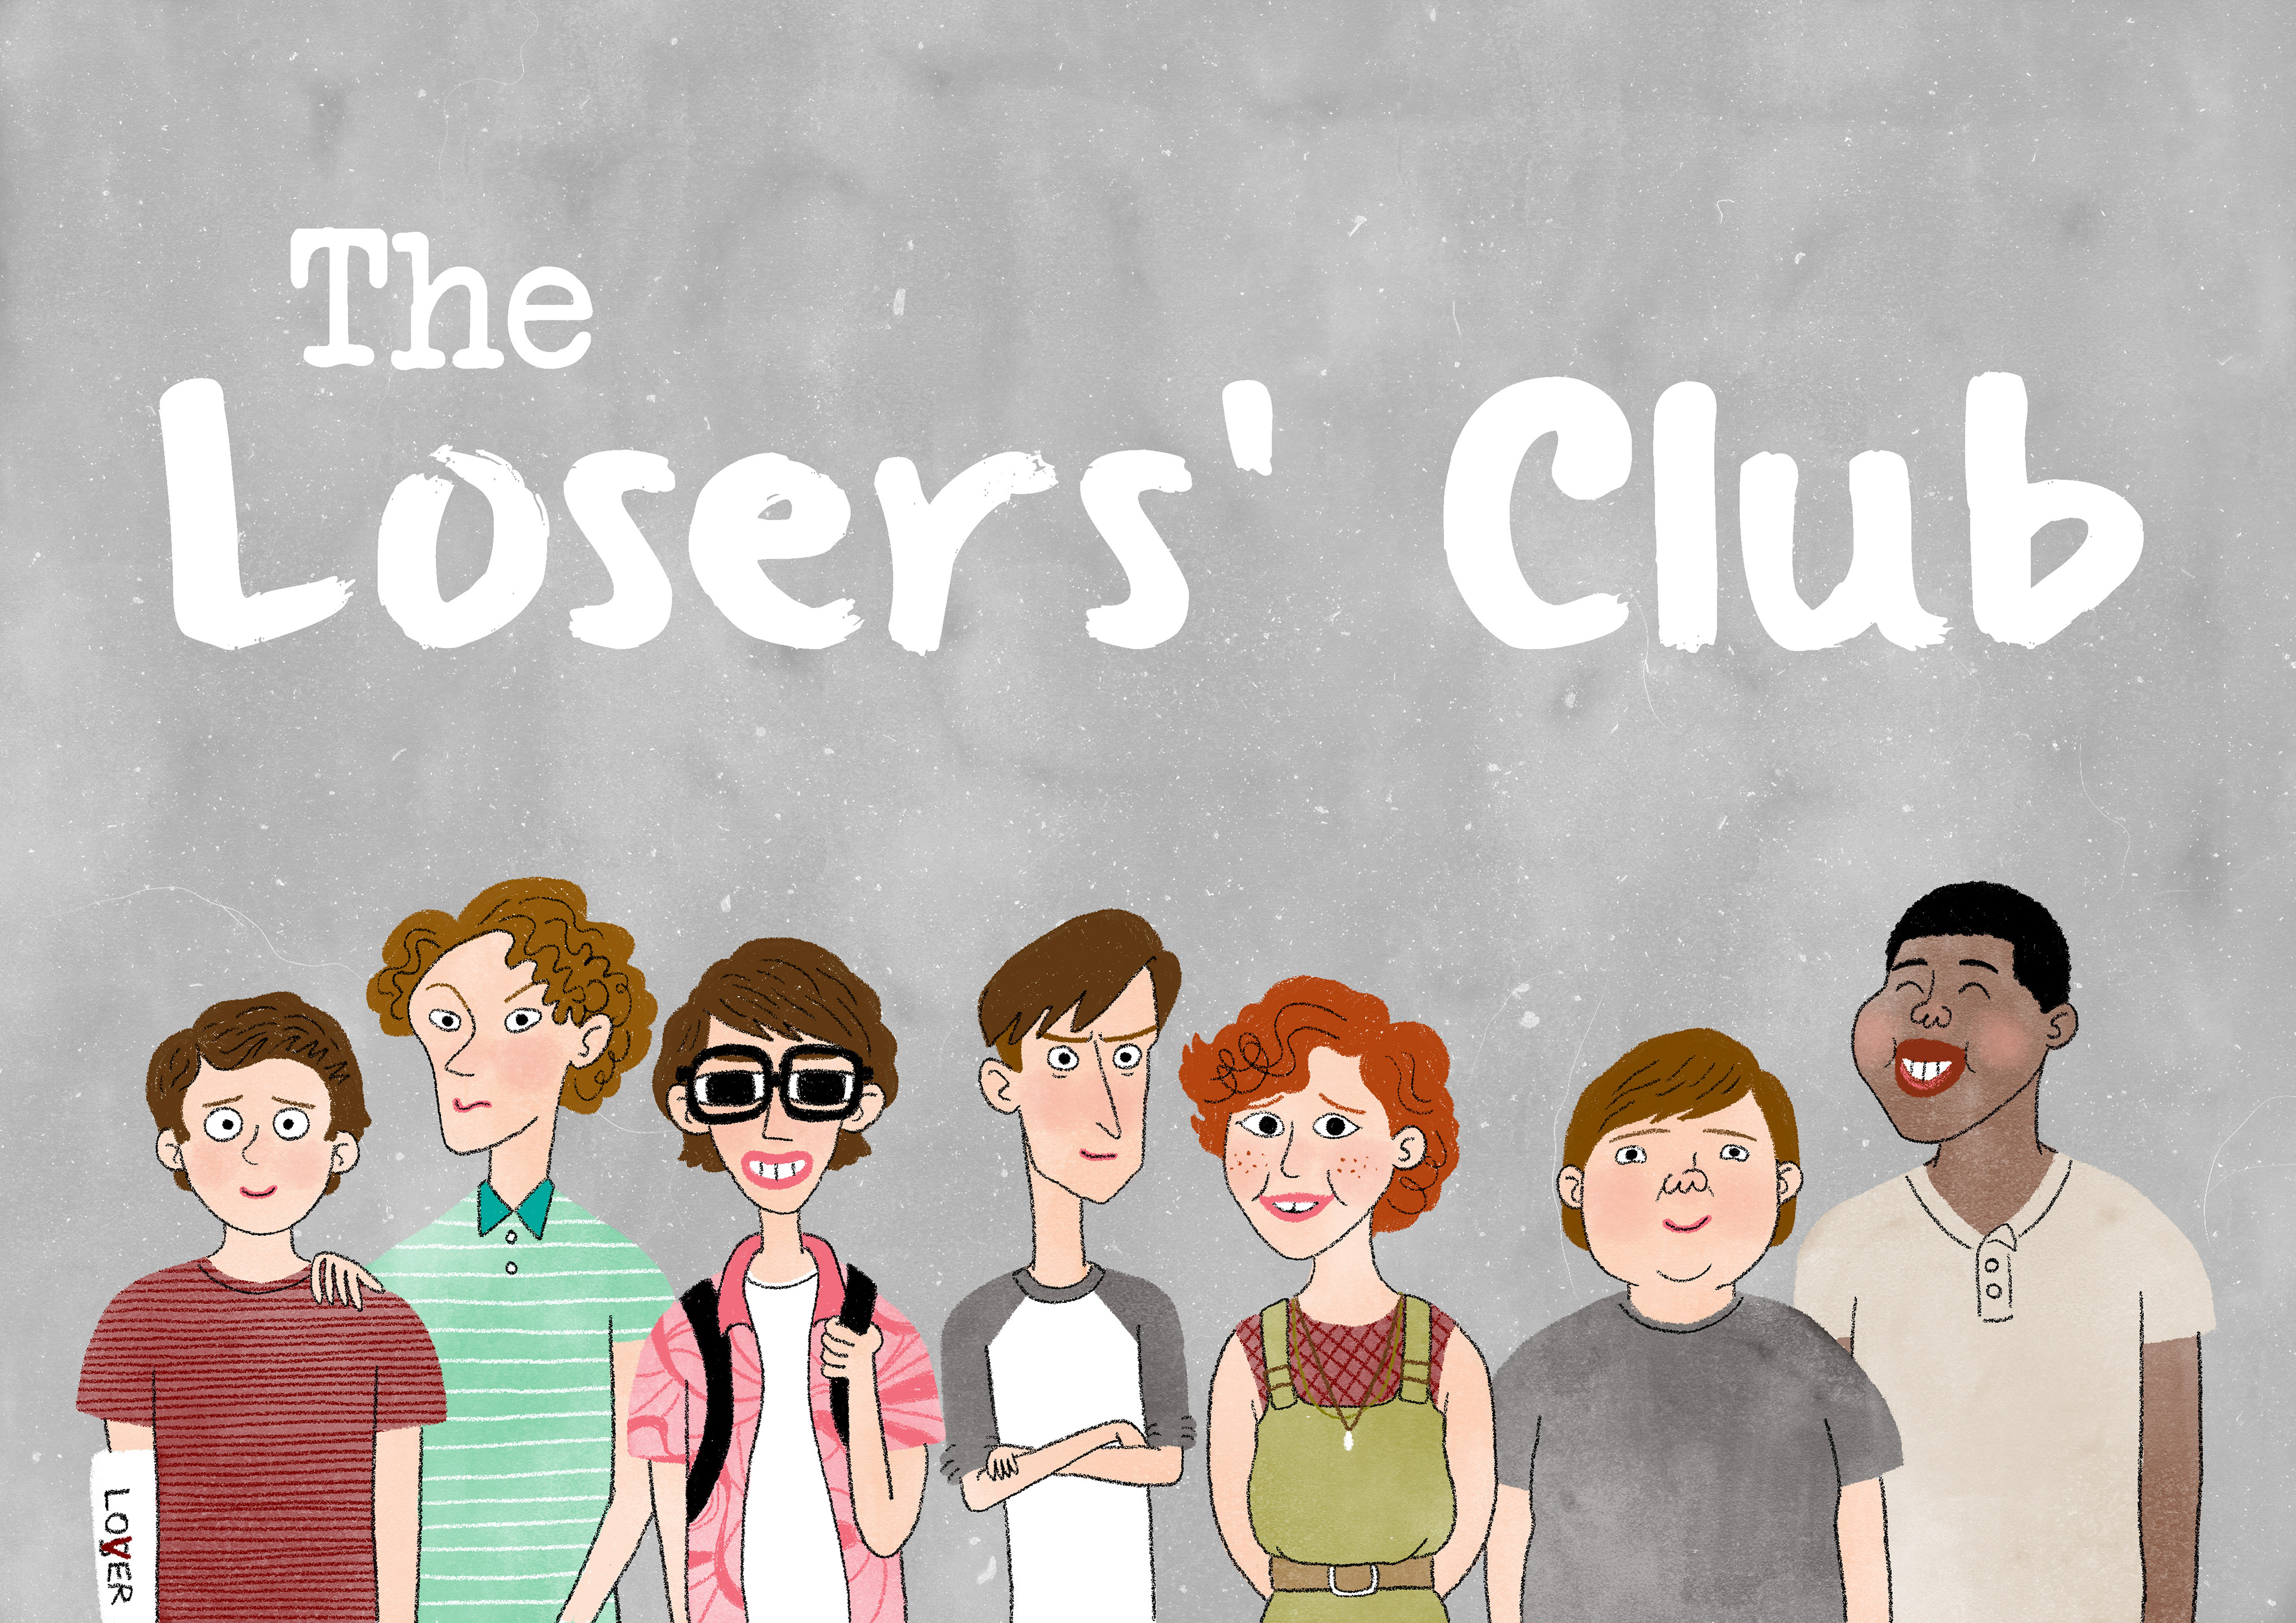 Curtis Rosenthal - Welcome to the Losers' Club asshole!